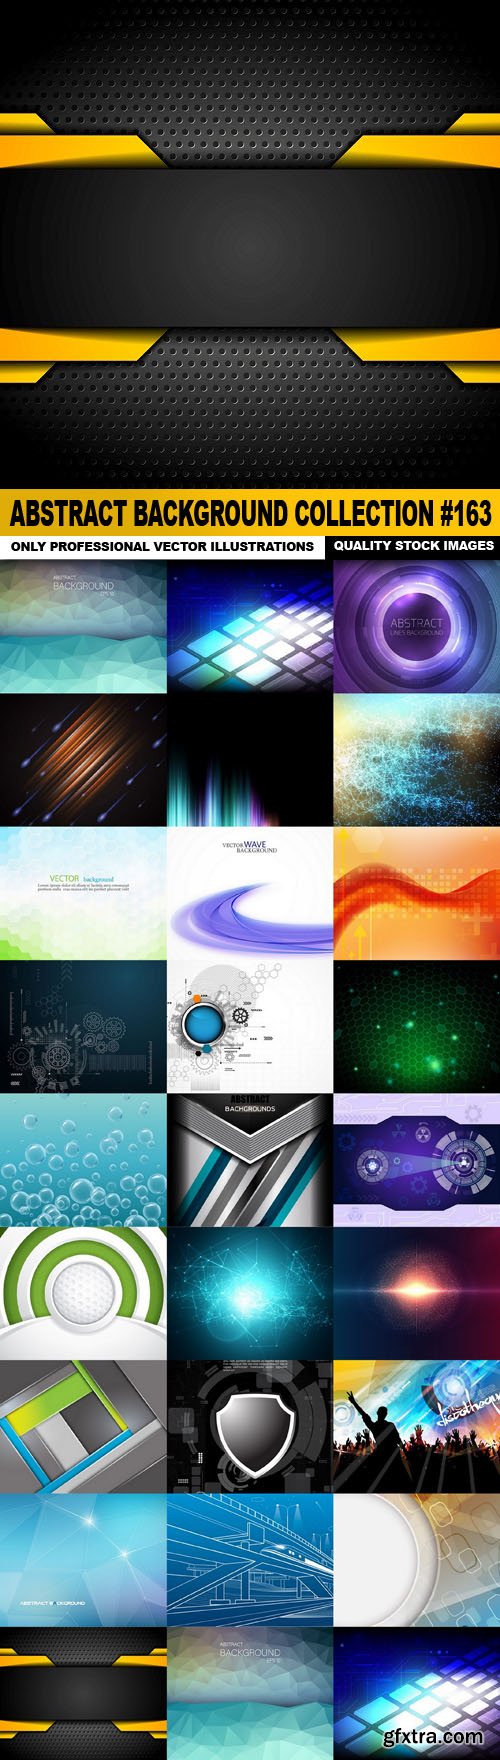 Abstract Background Collection #163 - 25 Vector